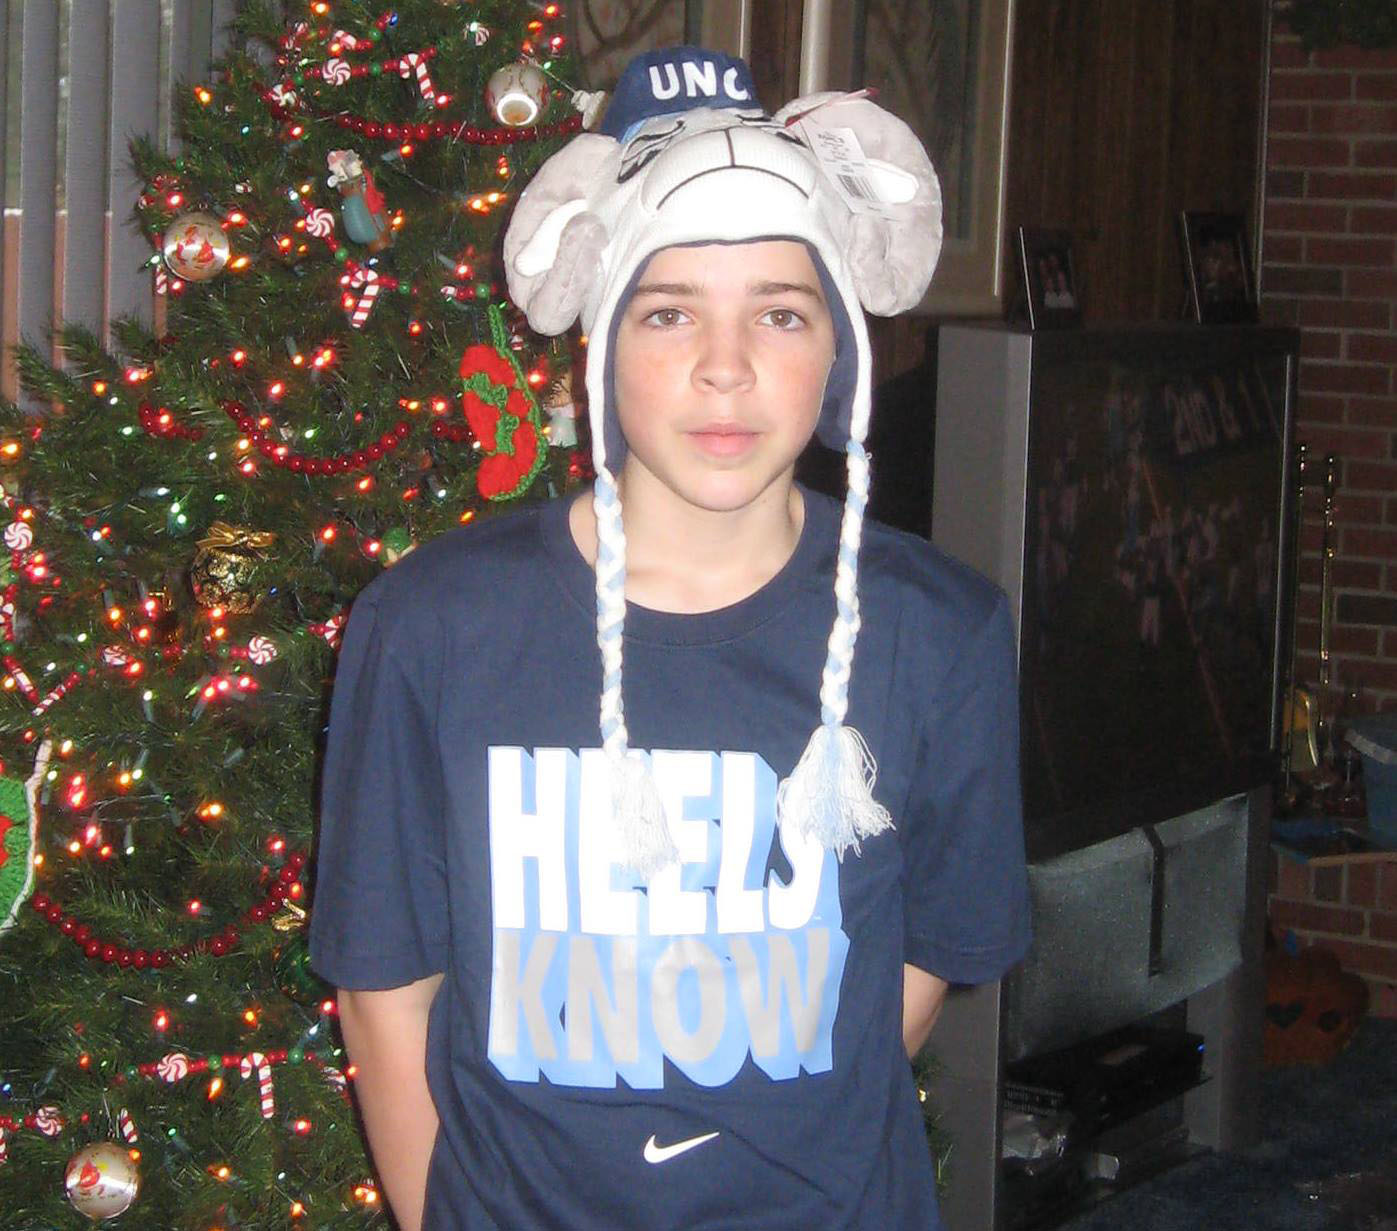 PHOTO: Mason Spencer is seen in University of North Carolina Tar Heels gear in this undated family photo. 